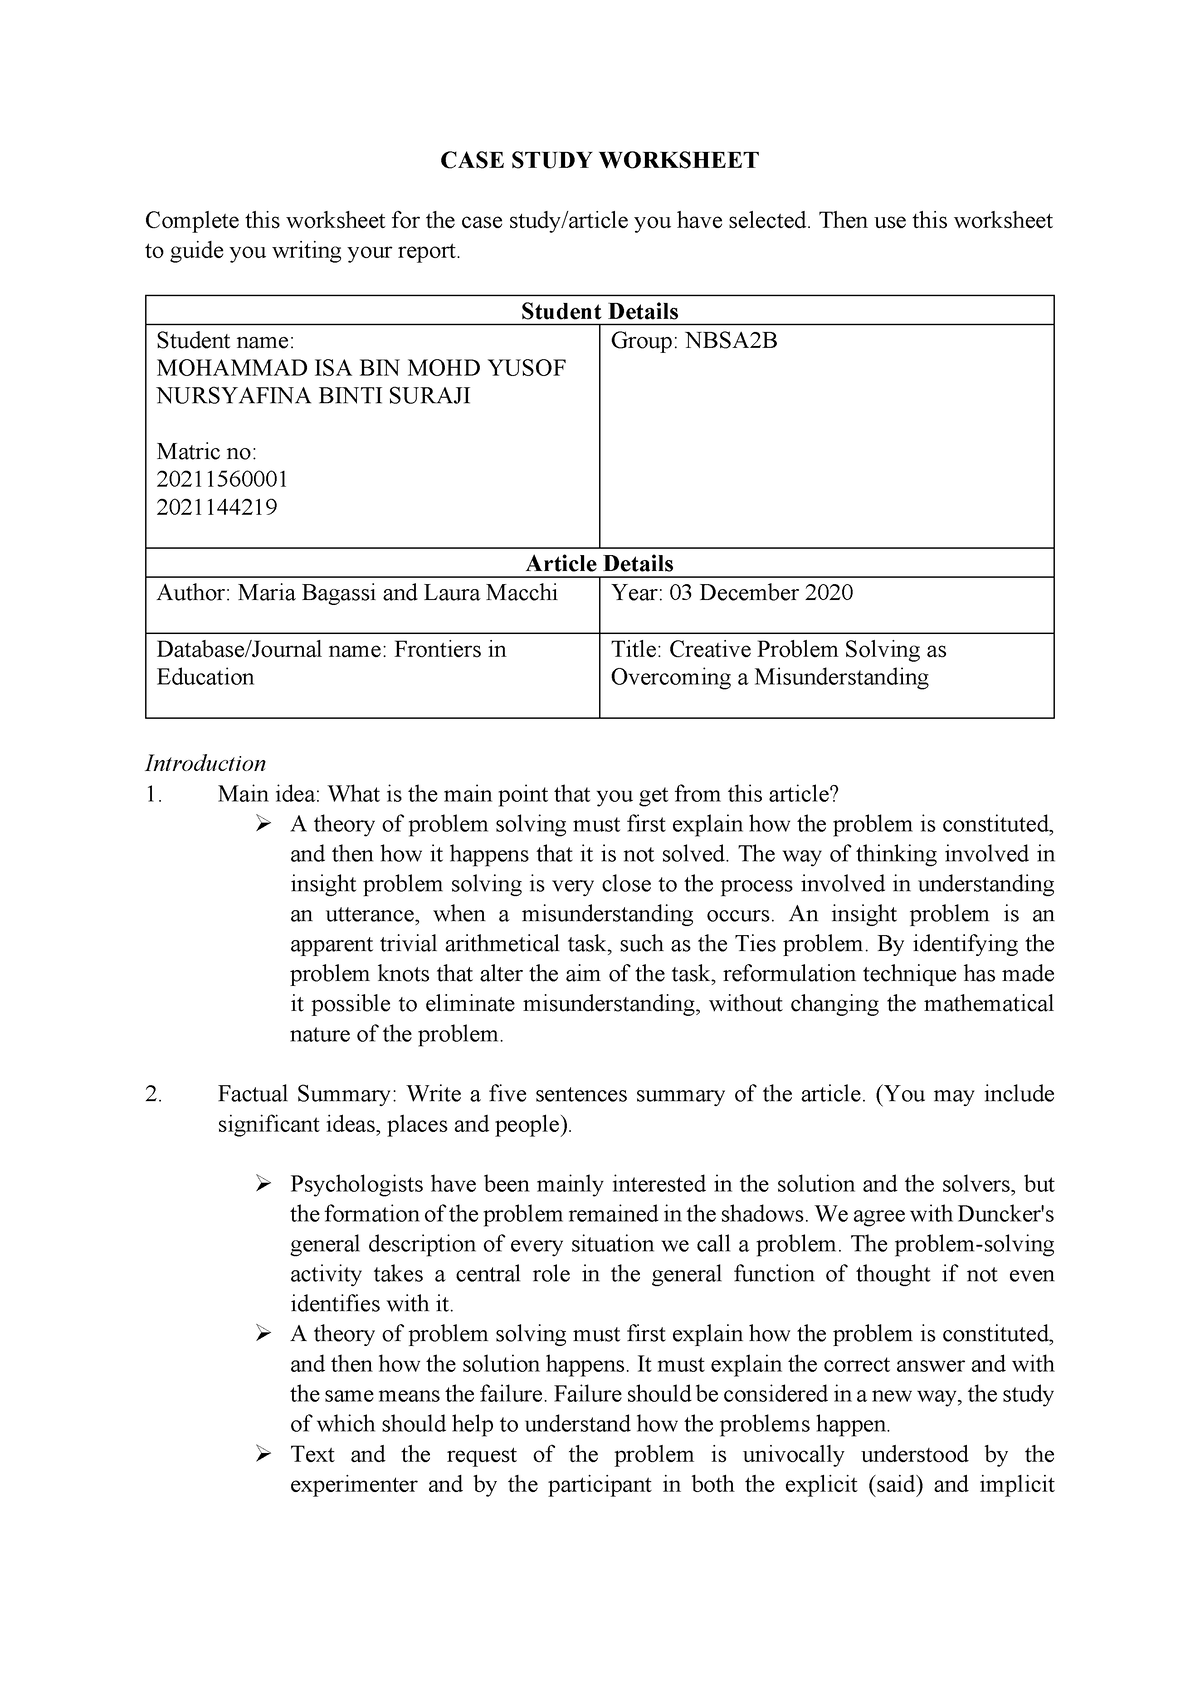 CASE Study Worksheet - CASE STUDY WORKSHEET Complete this worksheet for ...